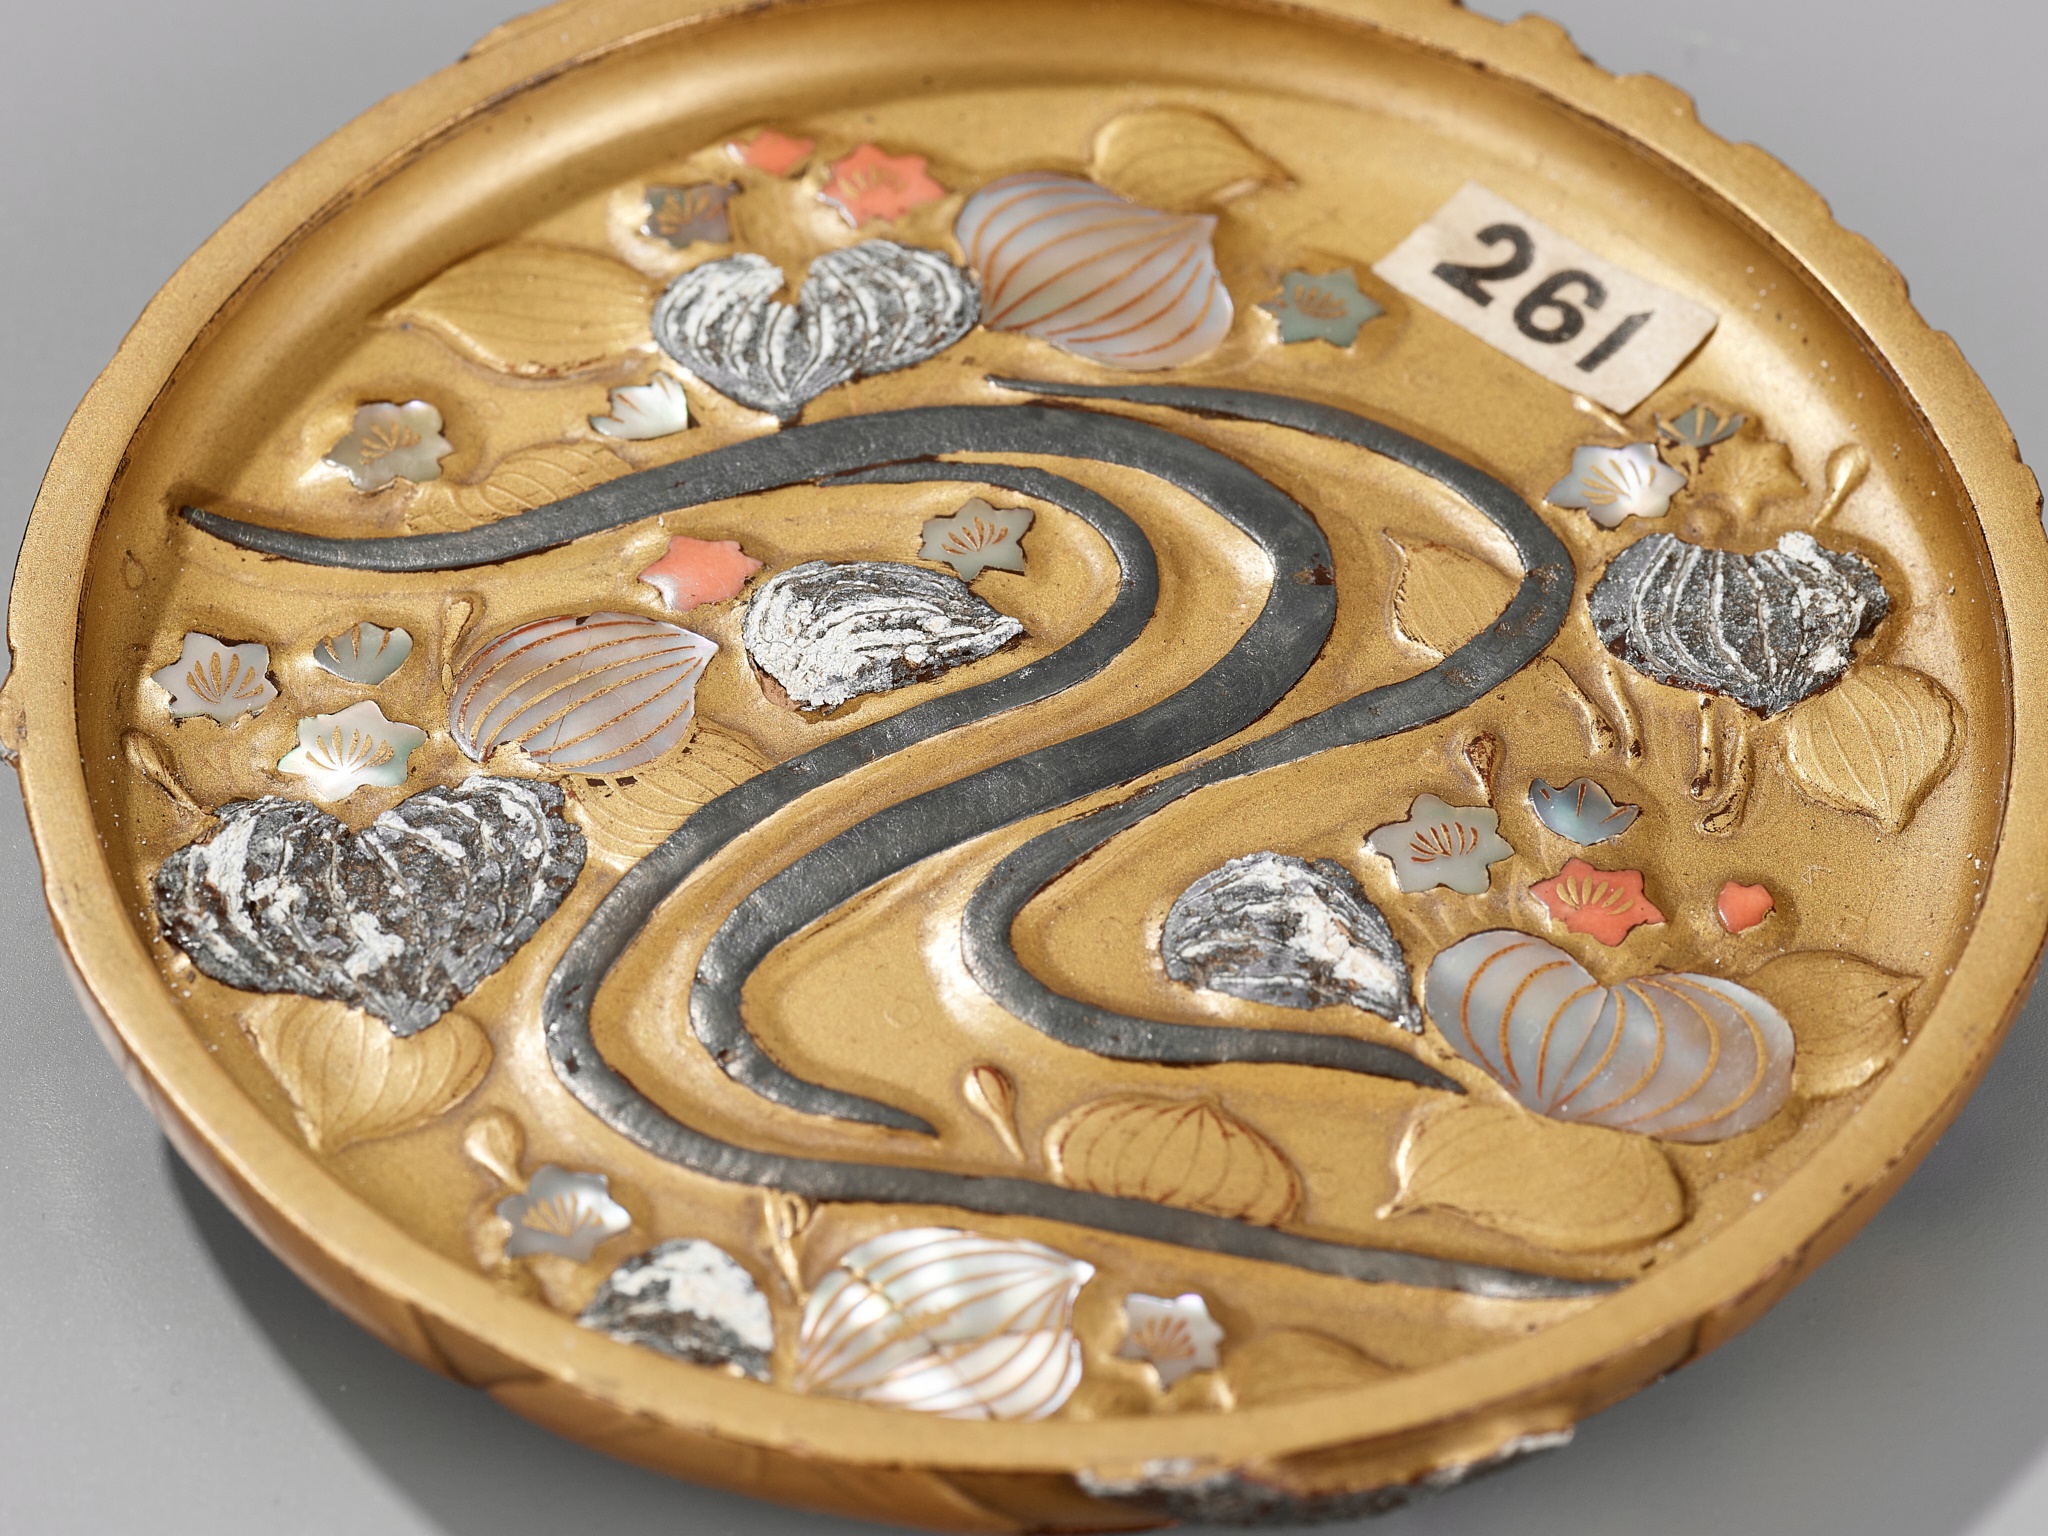 A FINE RINPA-STYLE INLAID LACQUER KOGO (INCENSE BOX) WITH CAMELLIA BLOSSOMS - Image 5 of 9